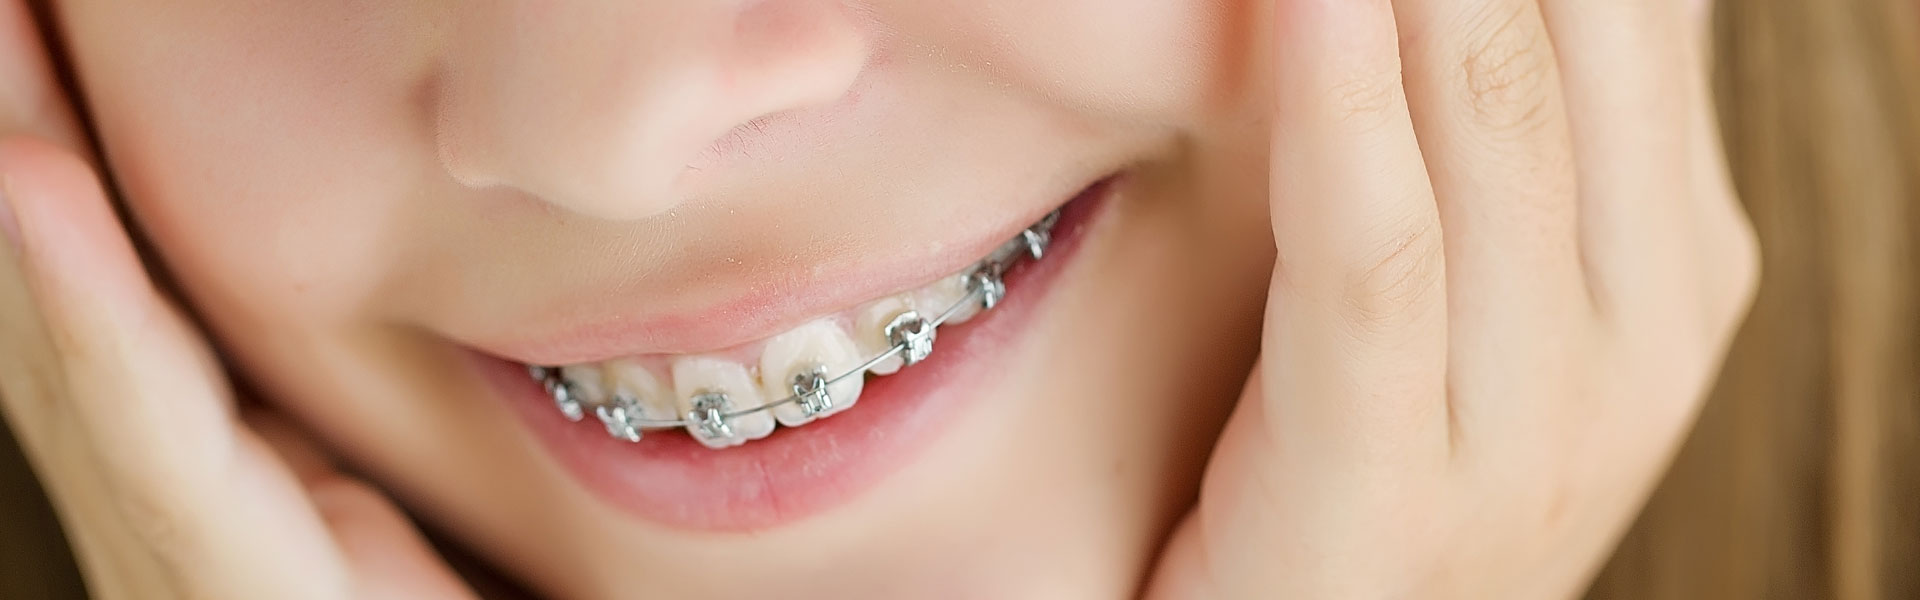 Caring for Braces Before and After Orthodontic Appointments